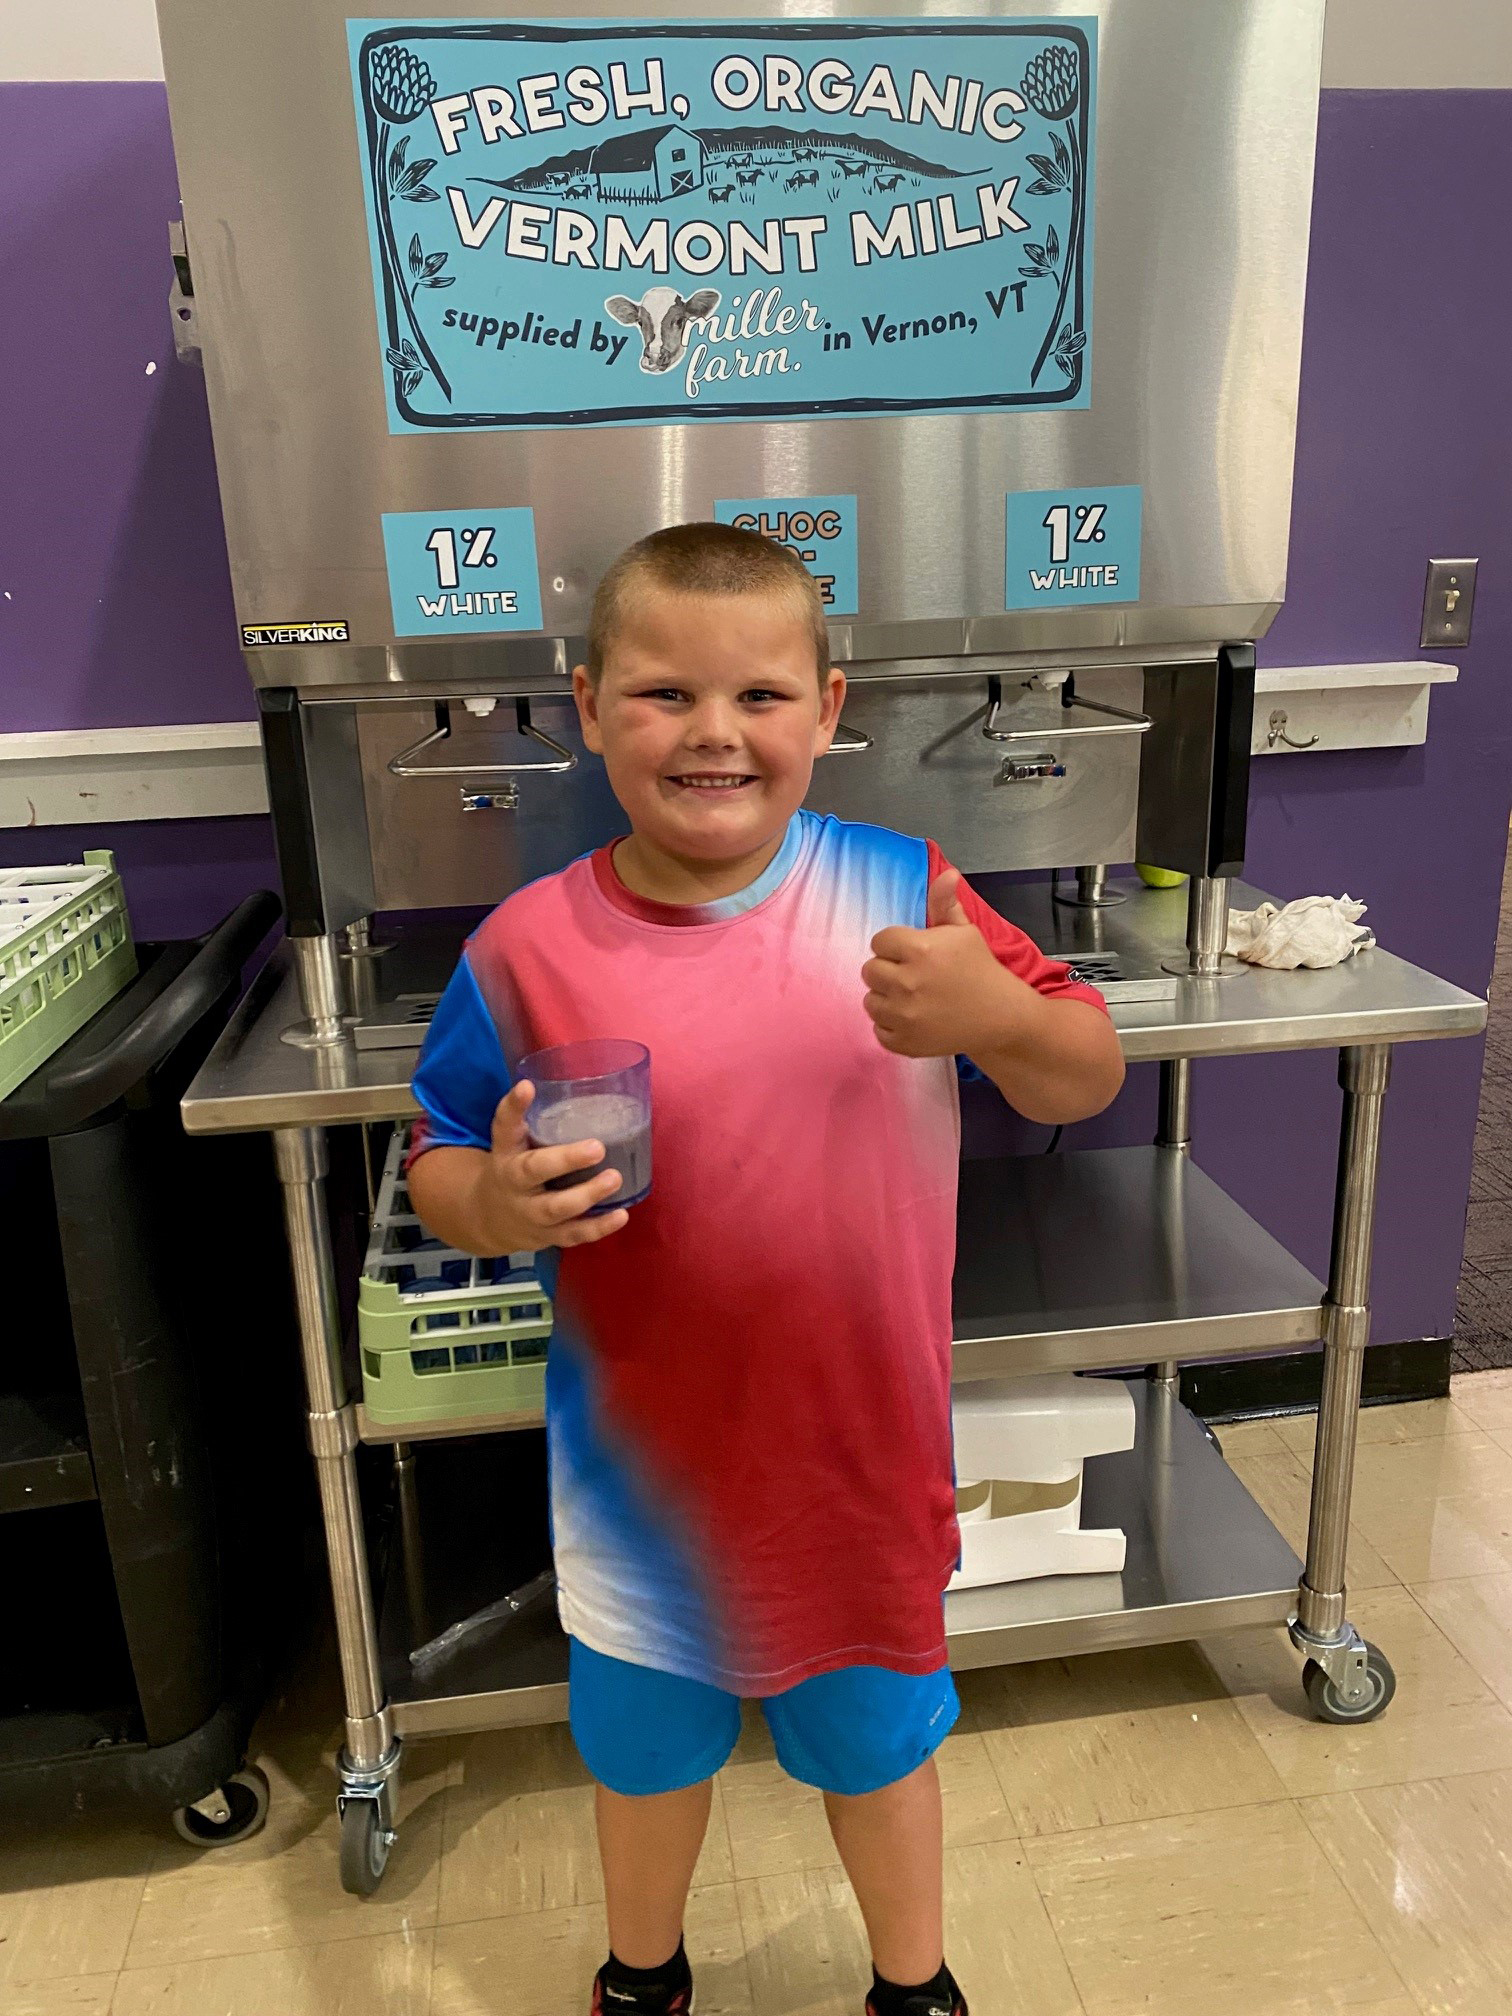 A young student gives an enthusiastic thumbs up to the new Miller Farm local, organic milk dispenser in the school cafeteria